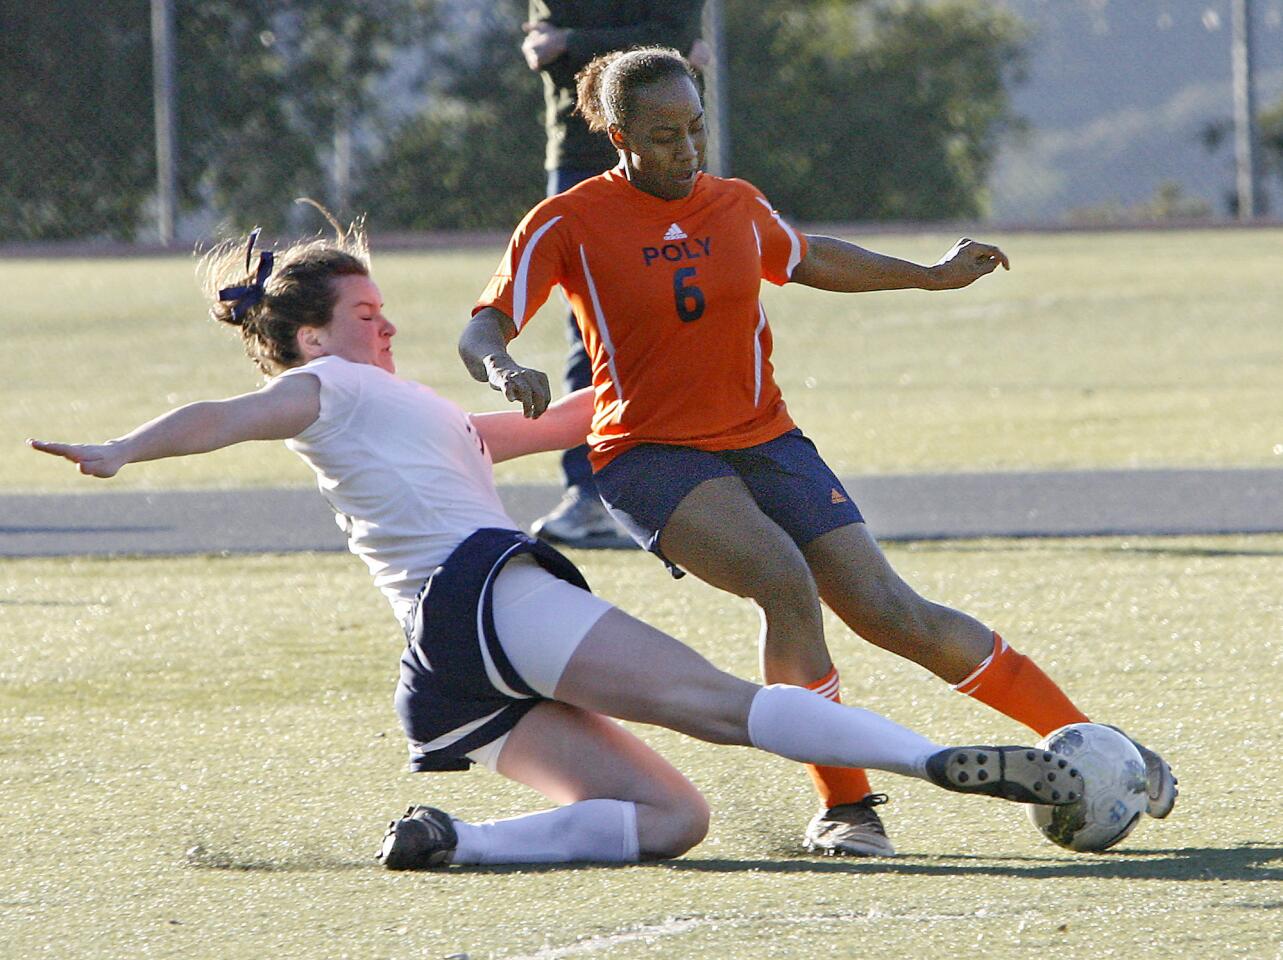 Flintridge Prep's Katherine Pinney sweeps the ball from Pasadena Poly's Noel Askins during a match on Monday, January 14, 2013.